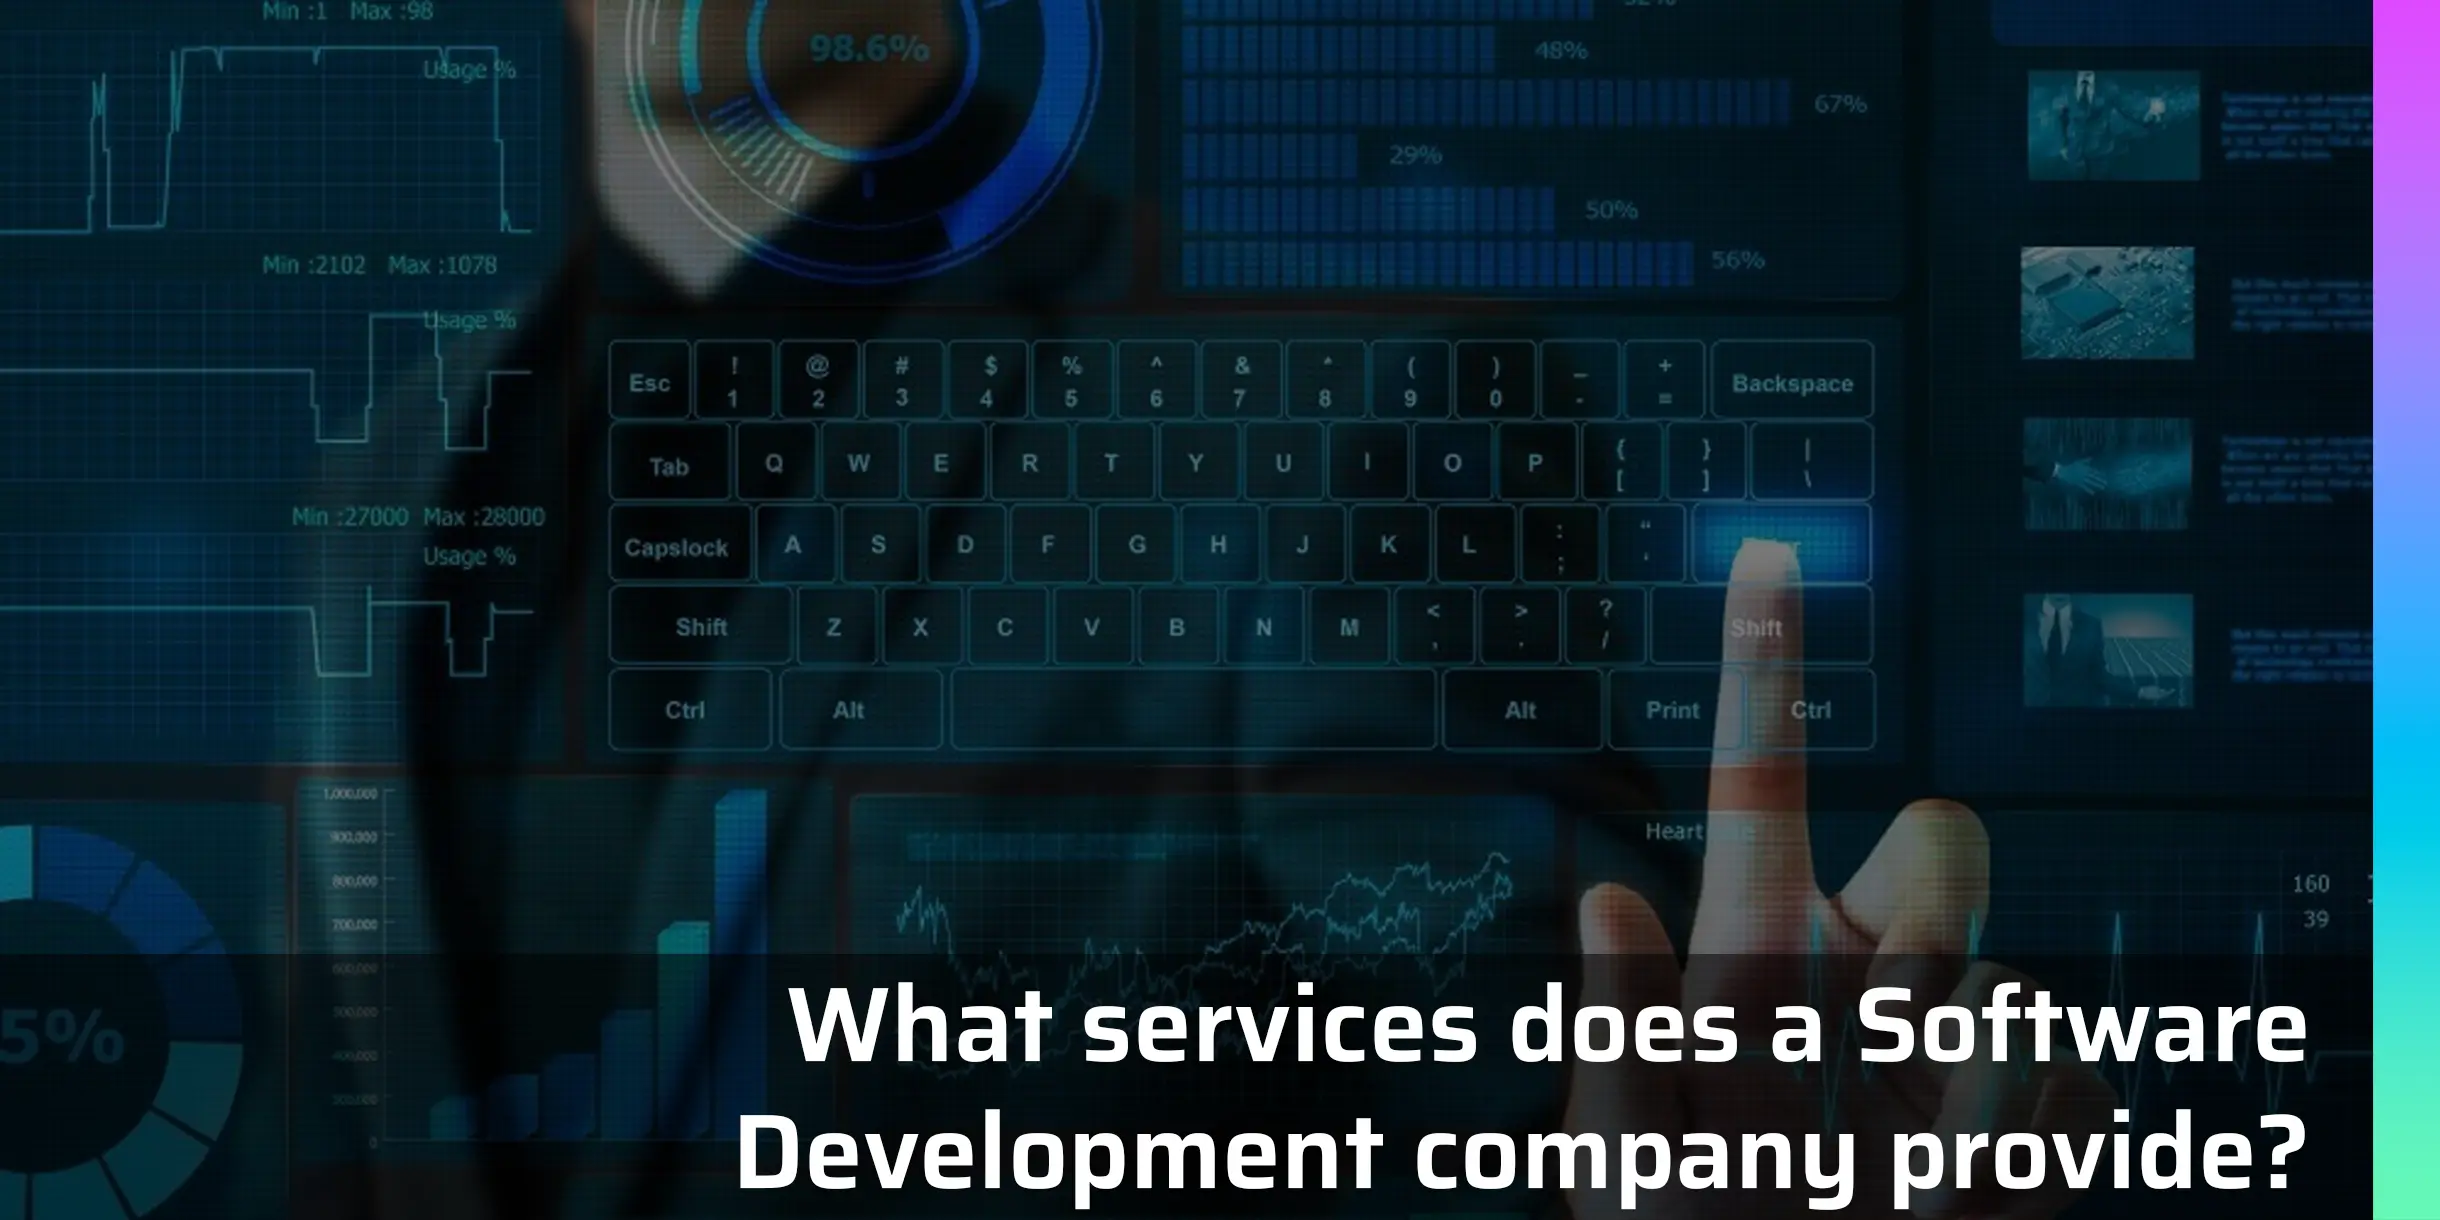 What services does a Software Development company provide